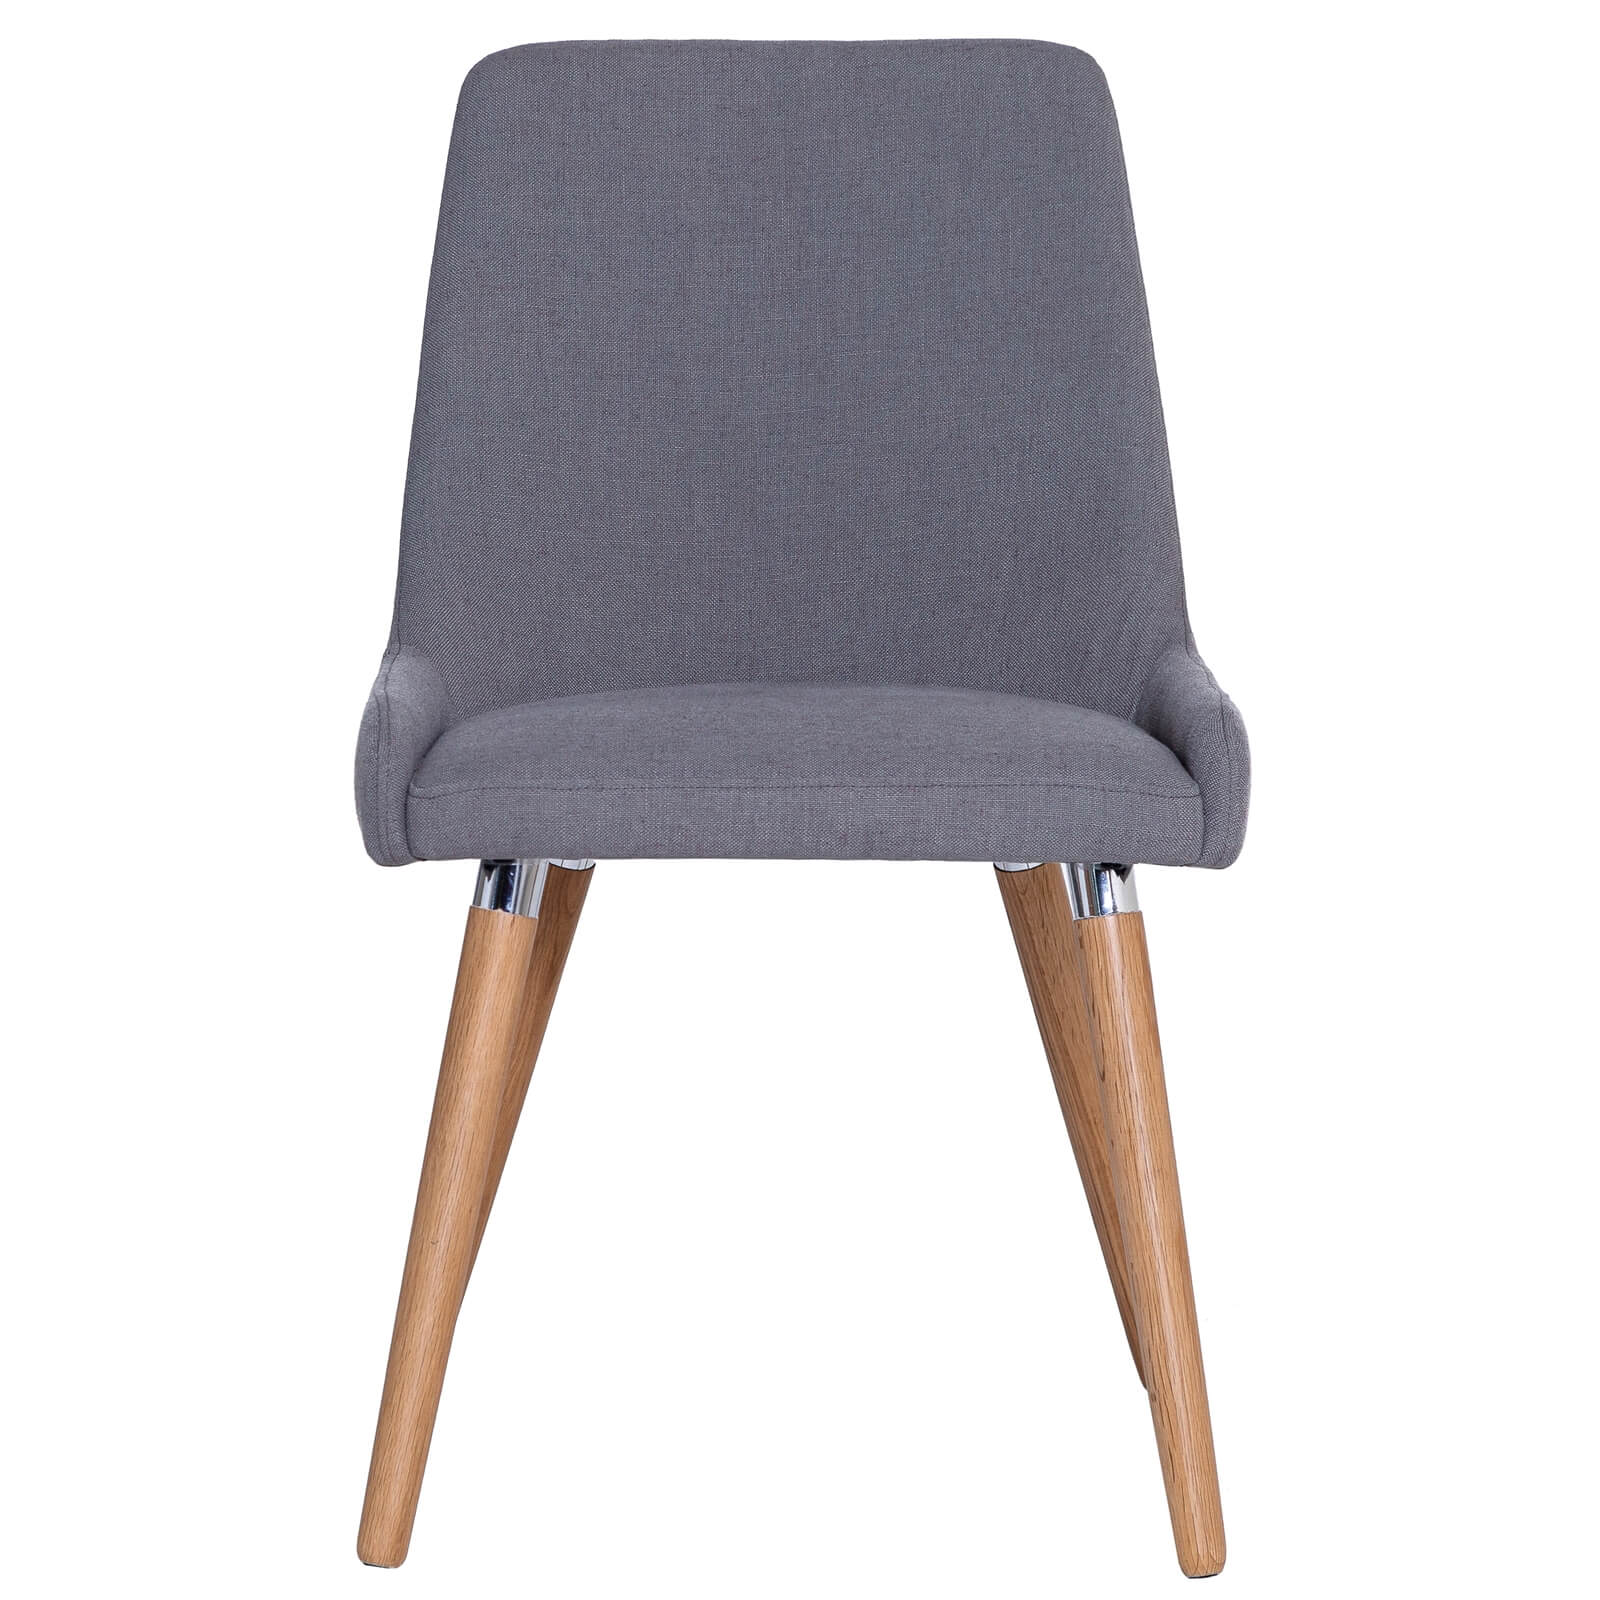 Retro Style Fabric Dining Chair - Set of 2 - Grey